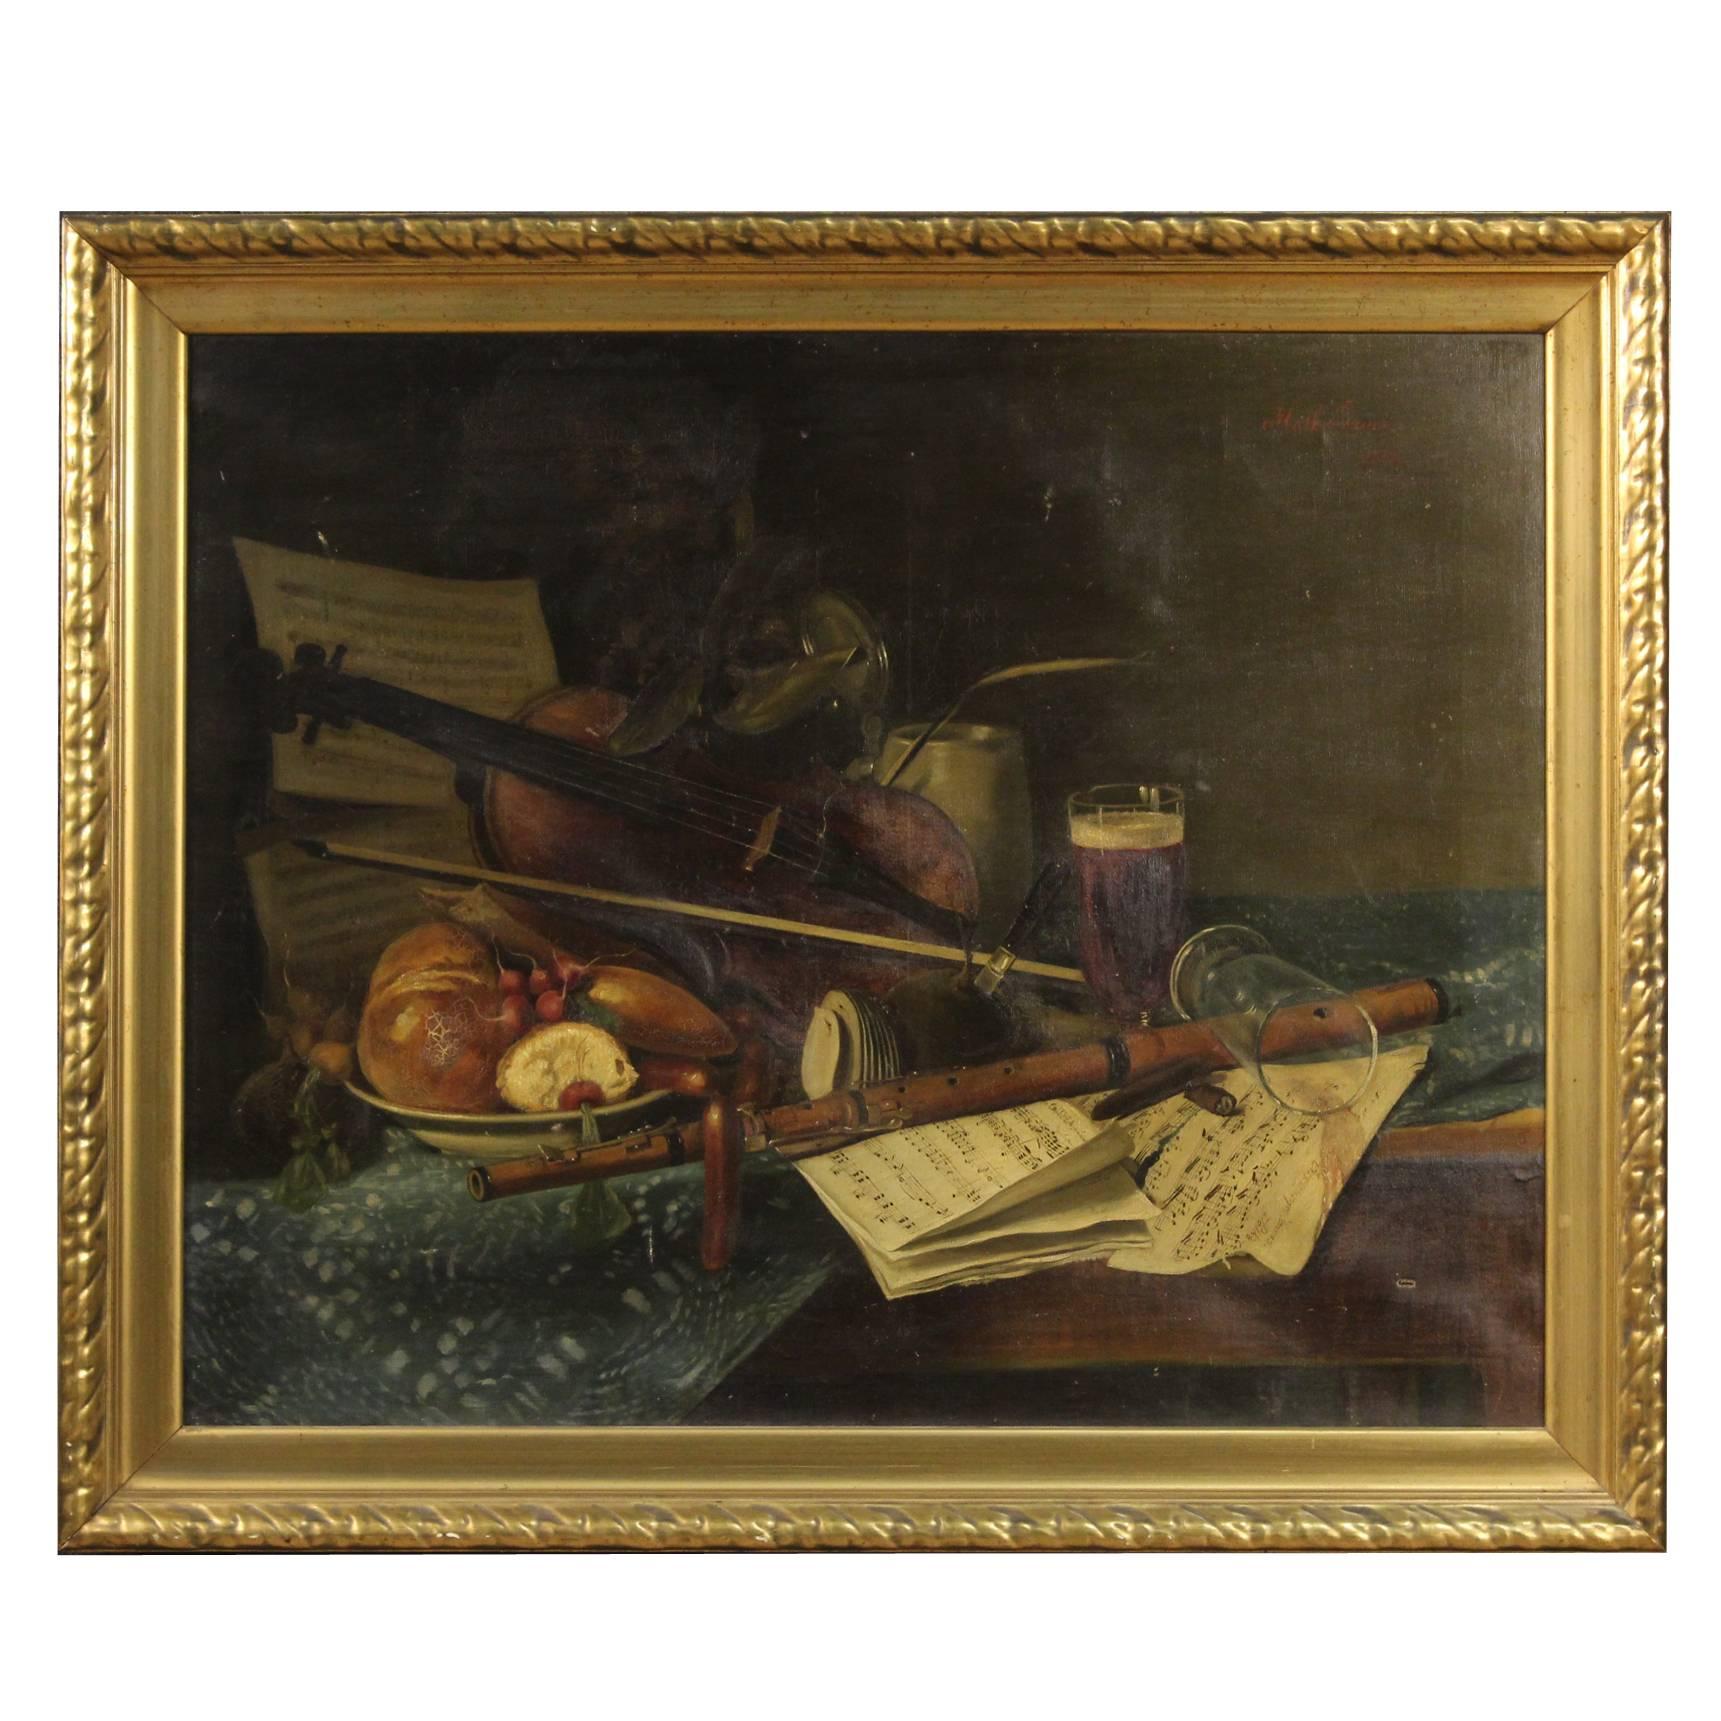 19th Century Painting Signed and Dated Math Bauer, 1882